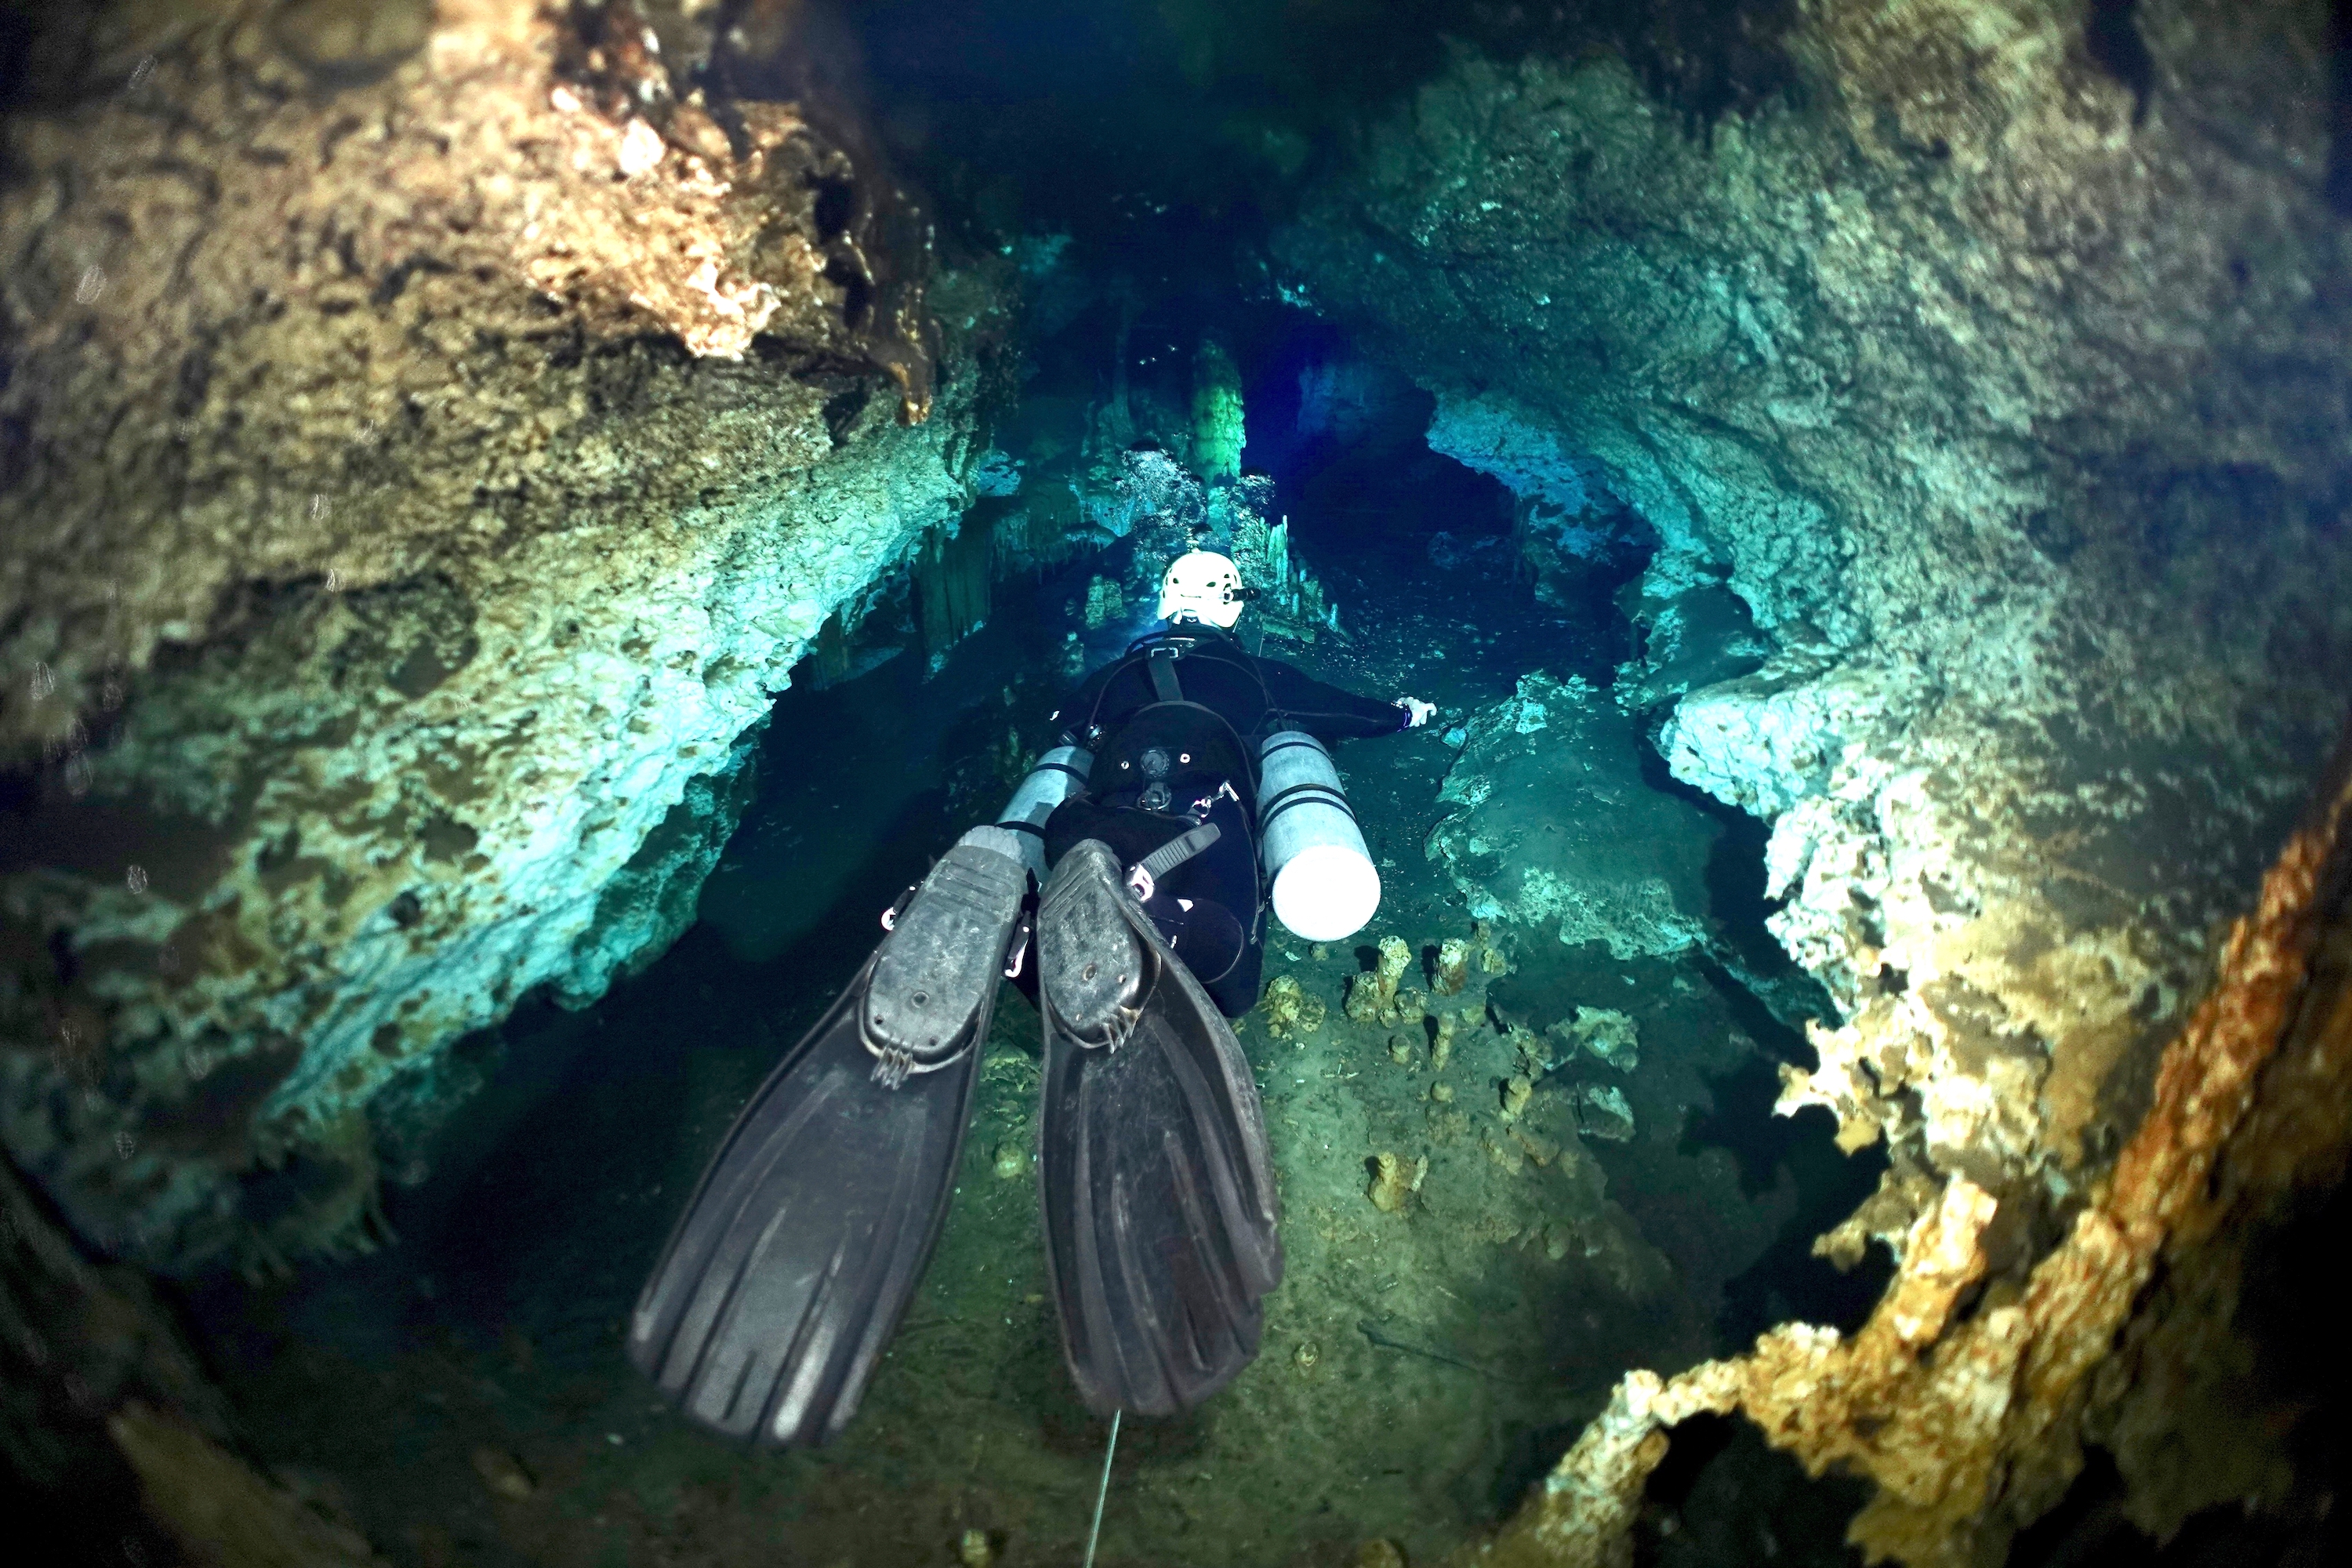 Dive guide Thibault inside tunnel of Cenote Cristal. Photo by Pierre Constant